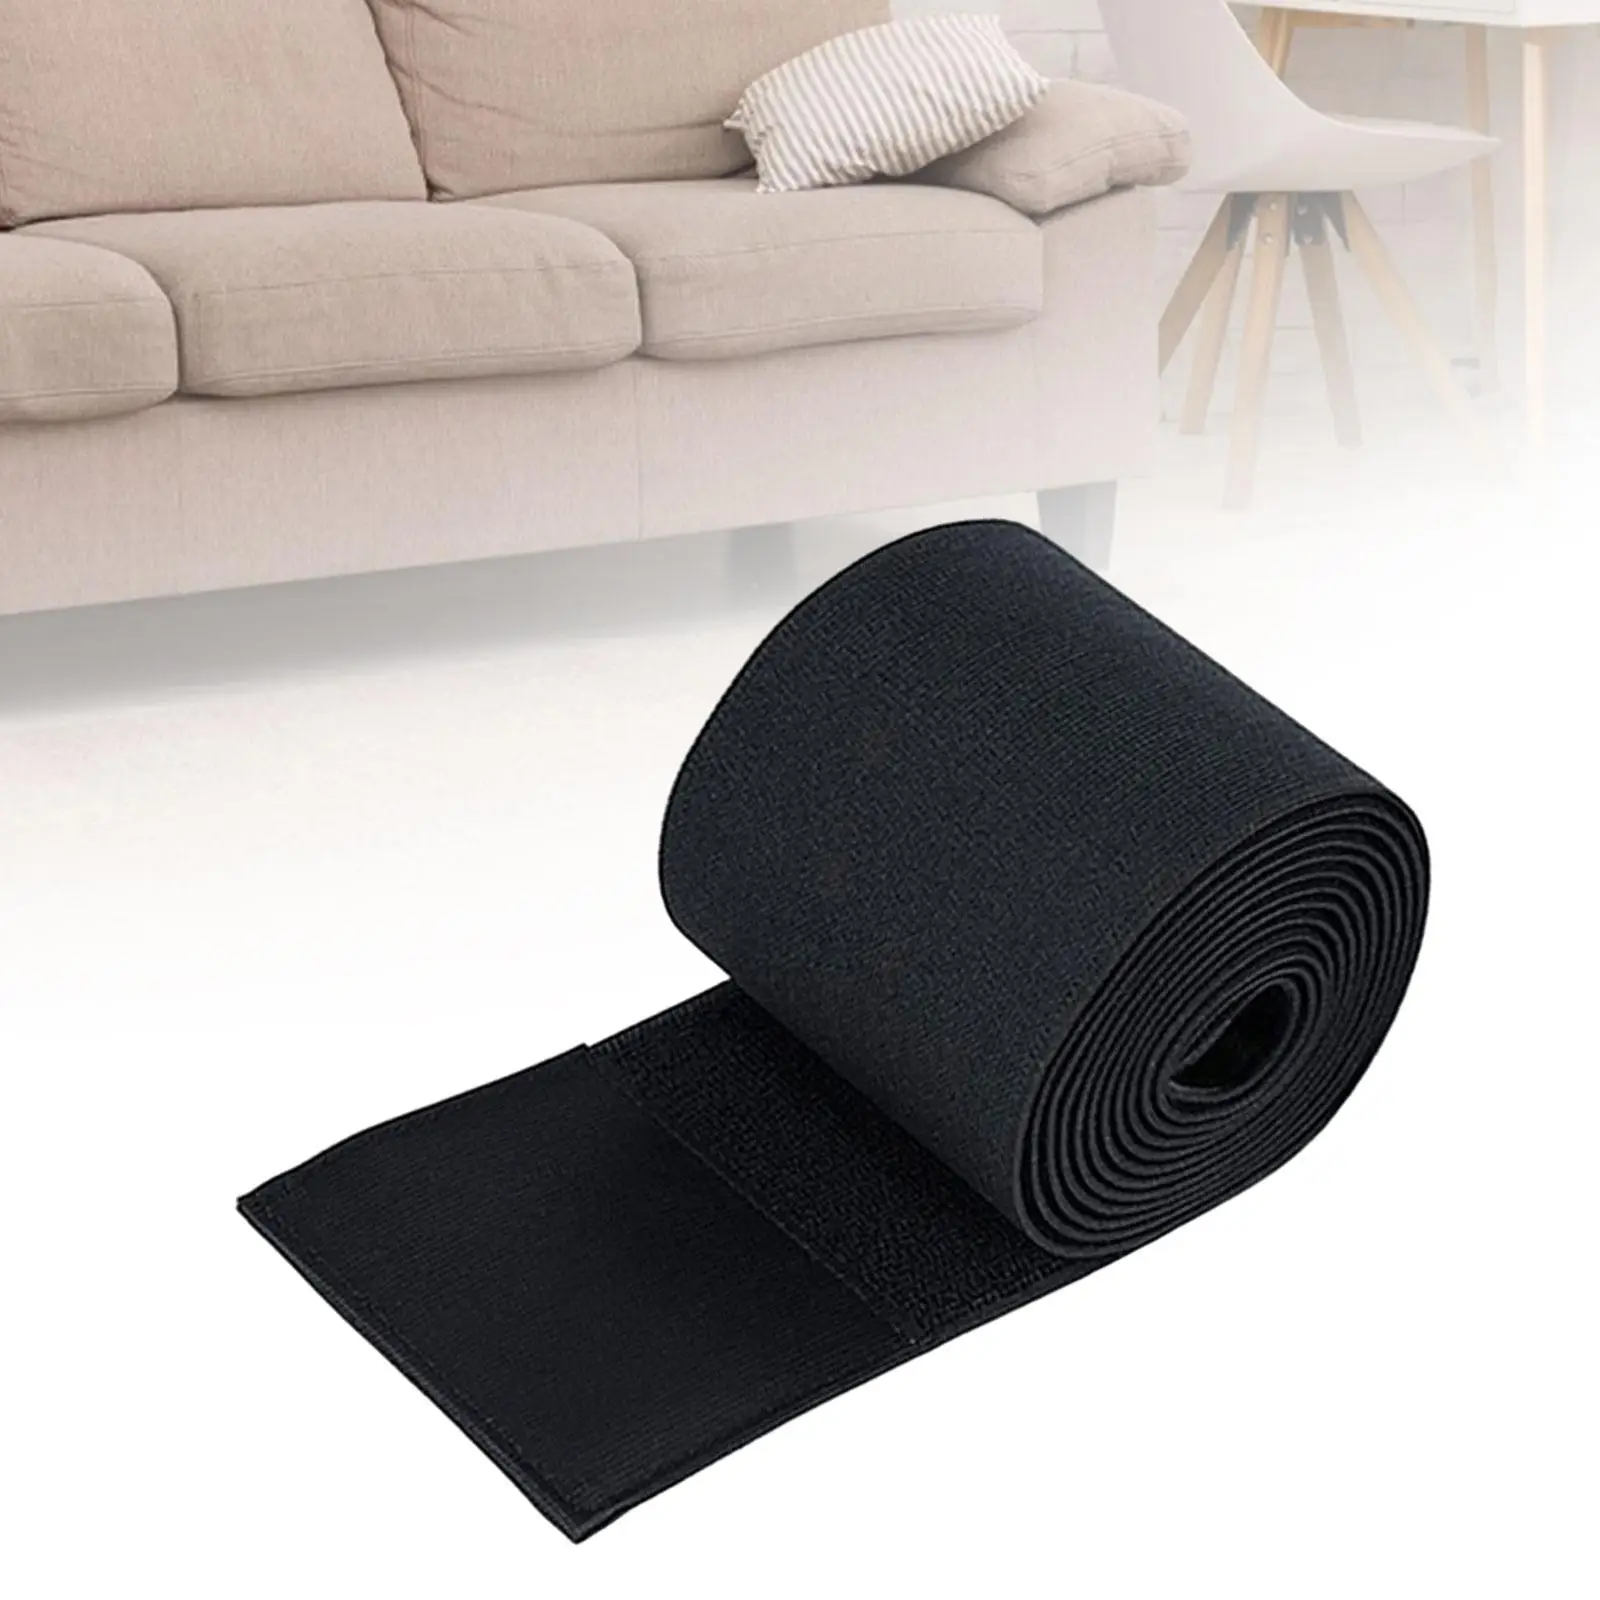 Universal Under Sofa Toy Blocker Under Bed for Living Room Furniture Couch